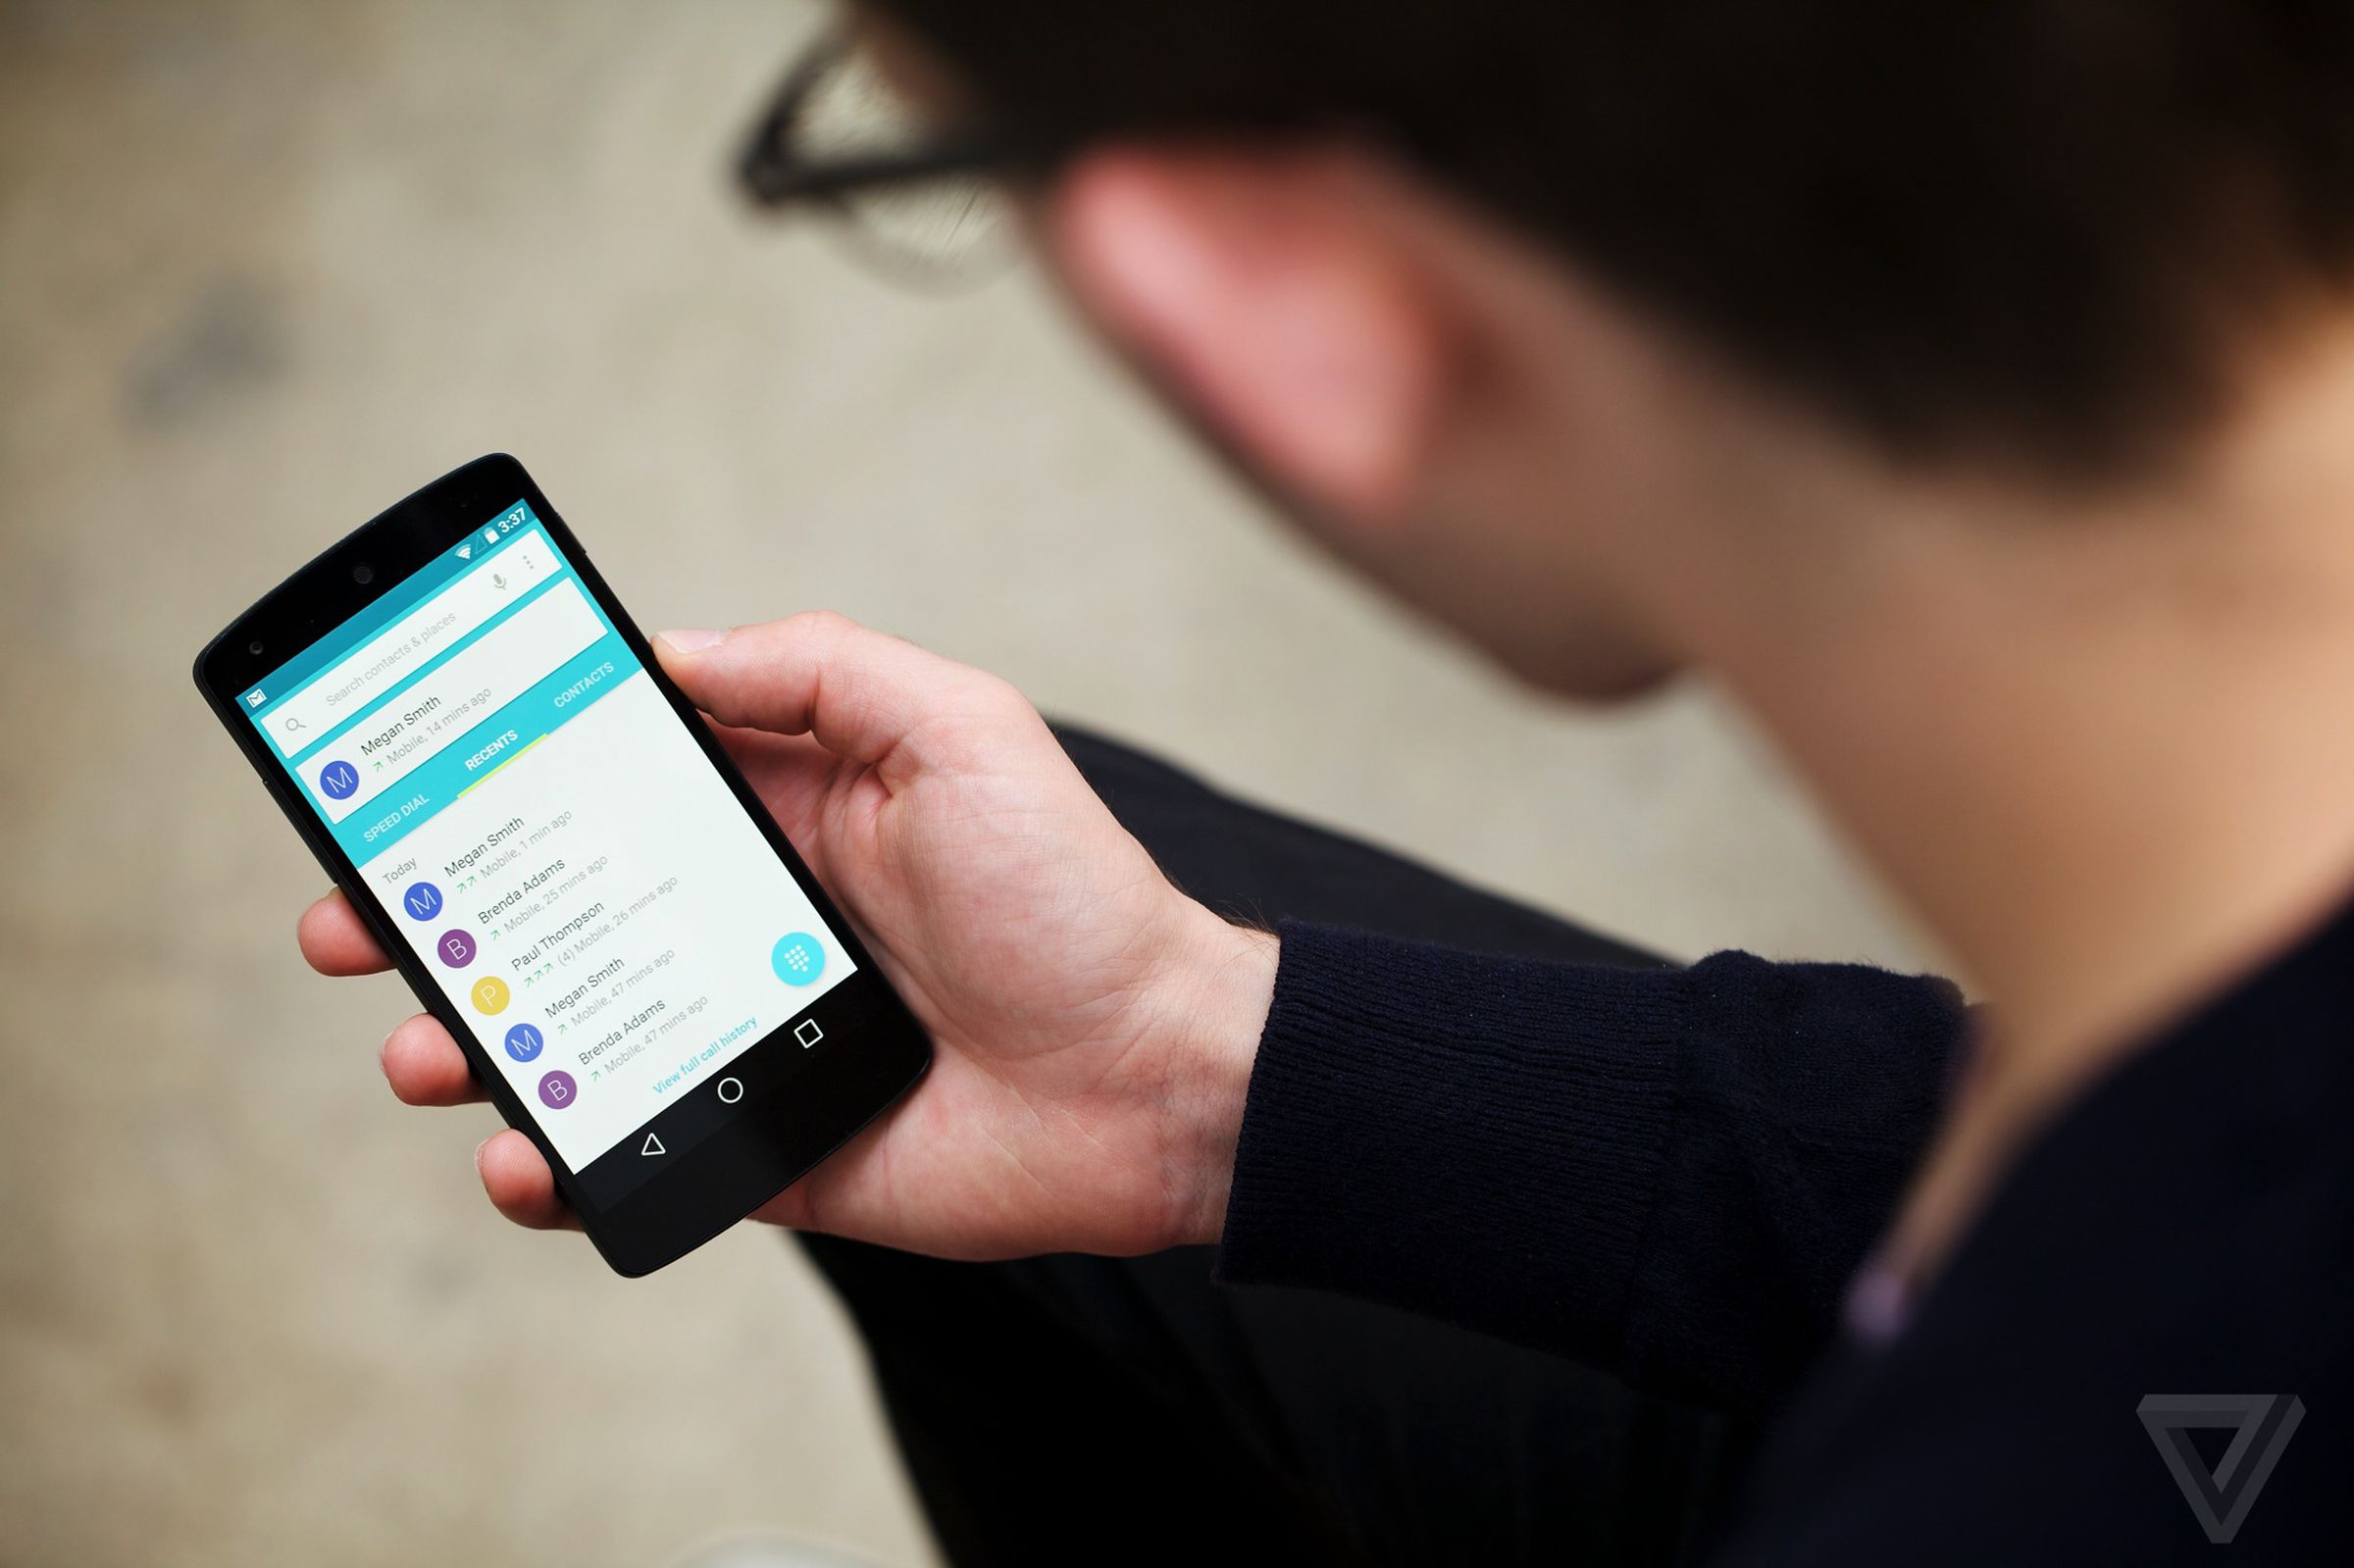 Android L developer preview photos